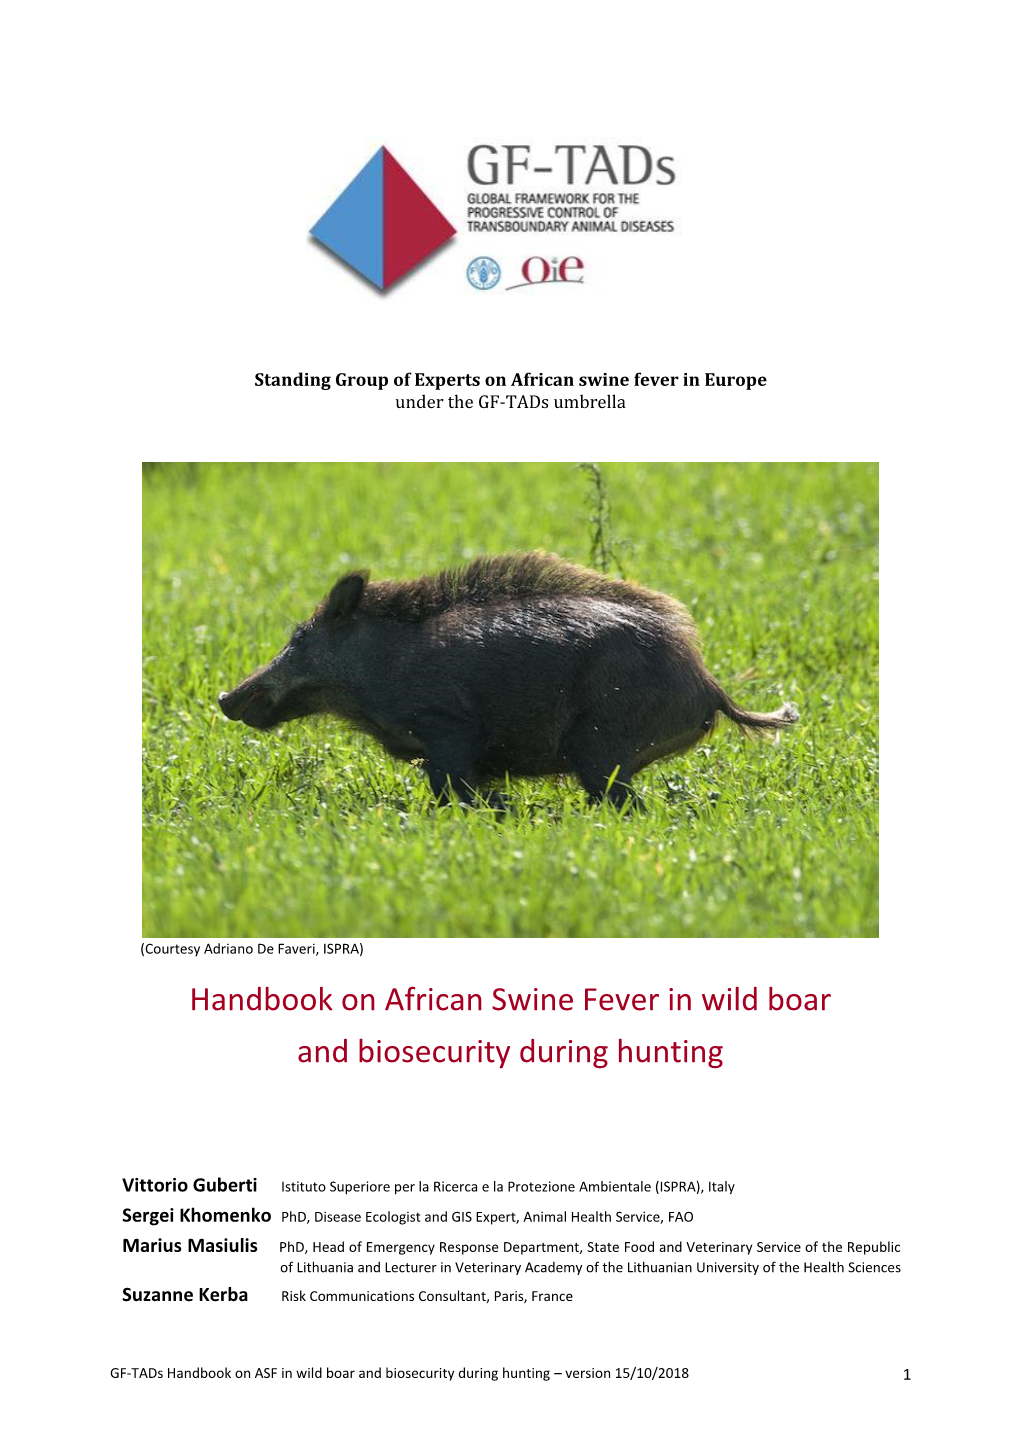 Handbook on African Swine Fever in Wild Boar and Biosecurity During Hunting